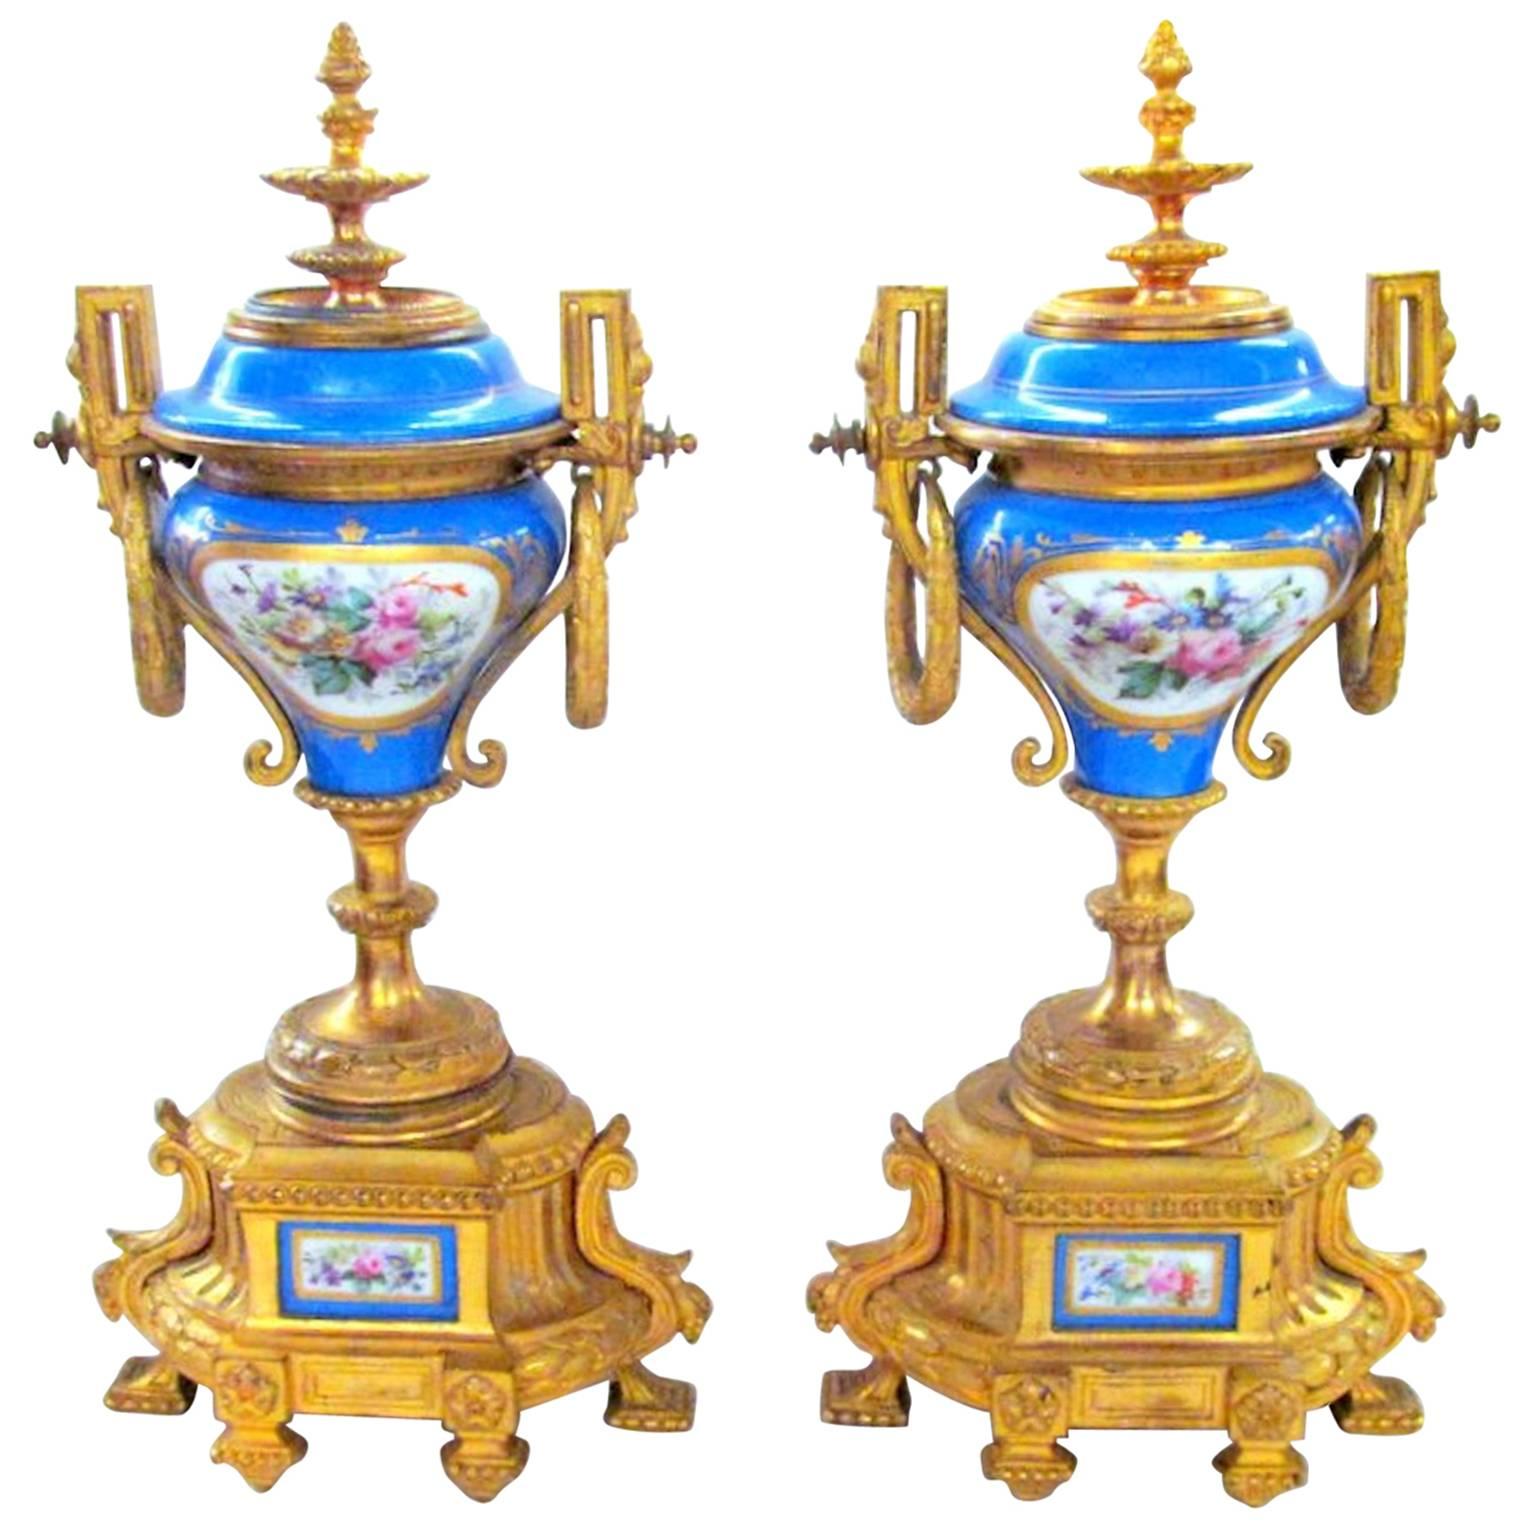 Pair of Antique French Sèvres-style Porcelain and Ormolu Mounted Cassolettes